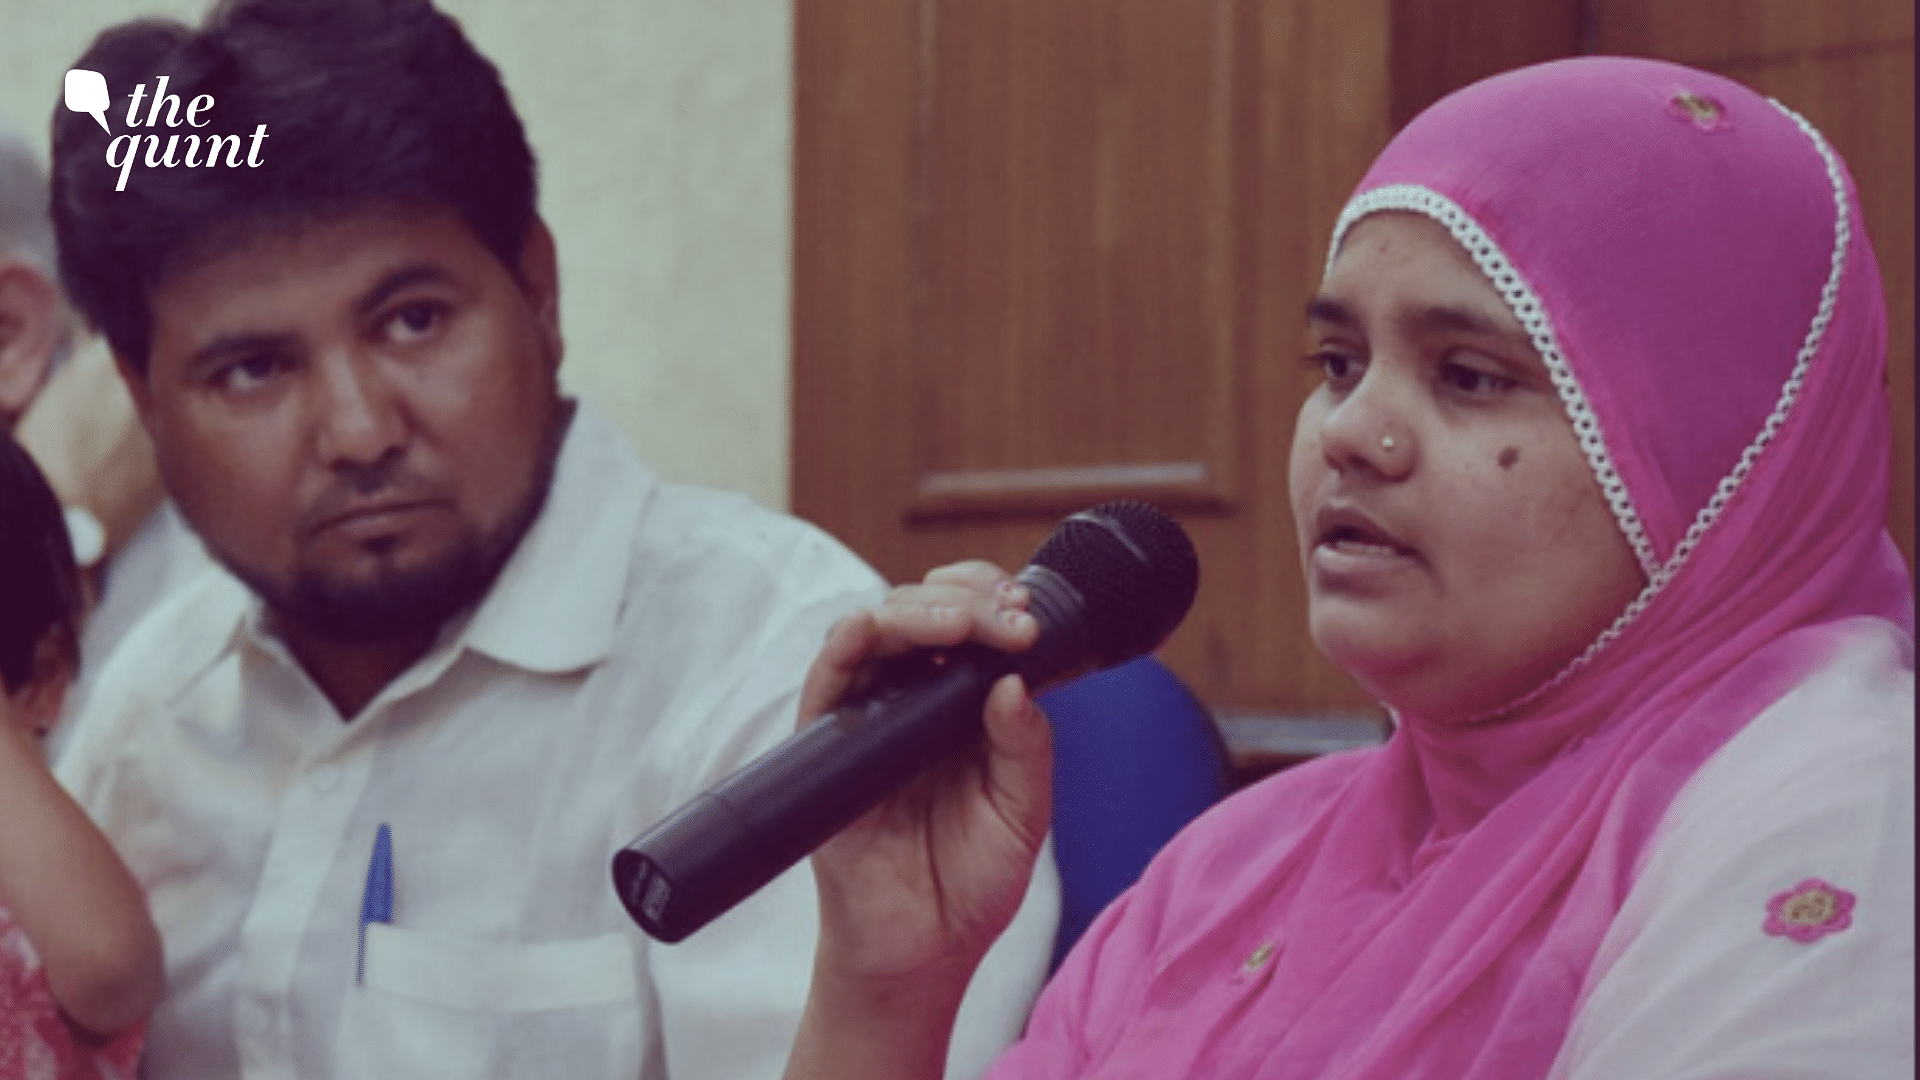 <div class="paragraphs"><p>On 15 August, 11 men – convicted of gang-raping Bilkis Bano, killing her three-year-old daughter and 13 other relatives during the 2002 Gujarat riots – walked out of the sub-jail in Gujarat’s Godhra.</p></div>